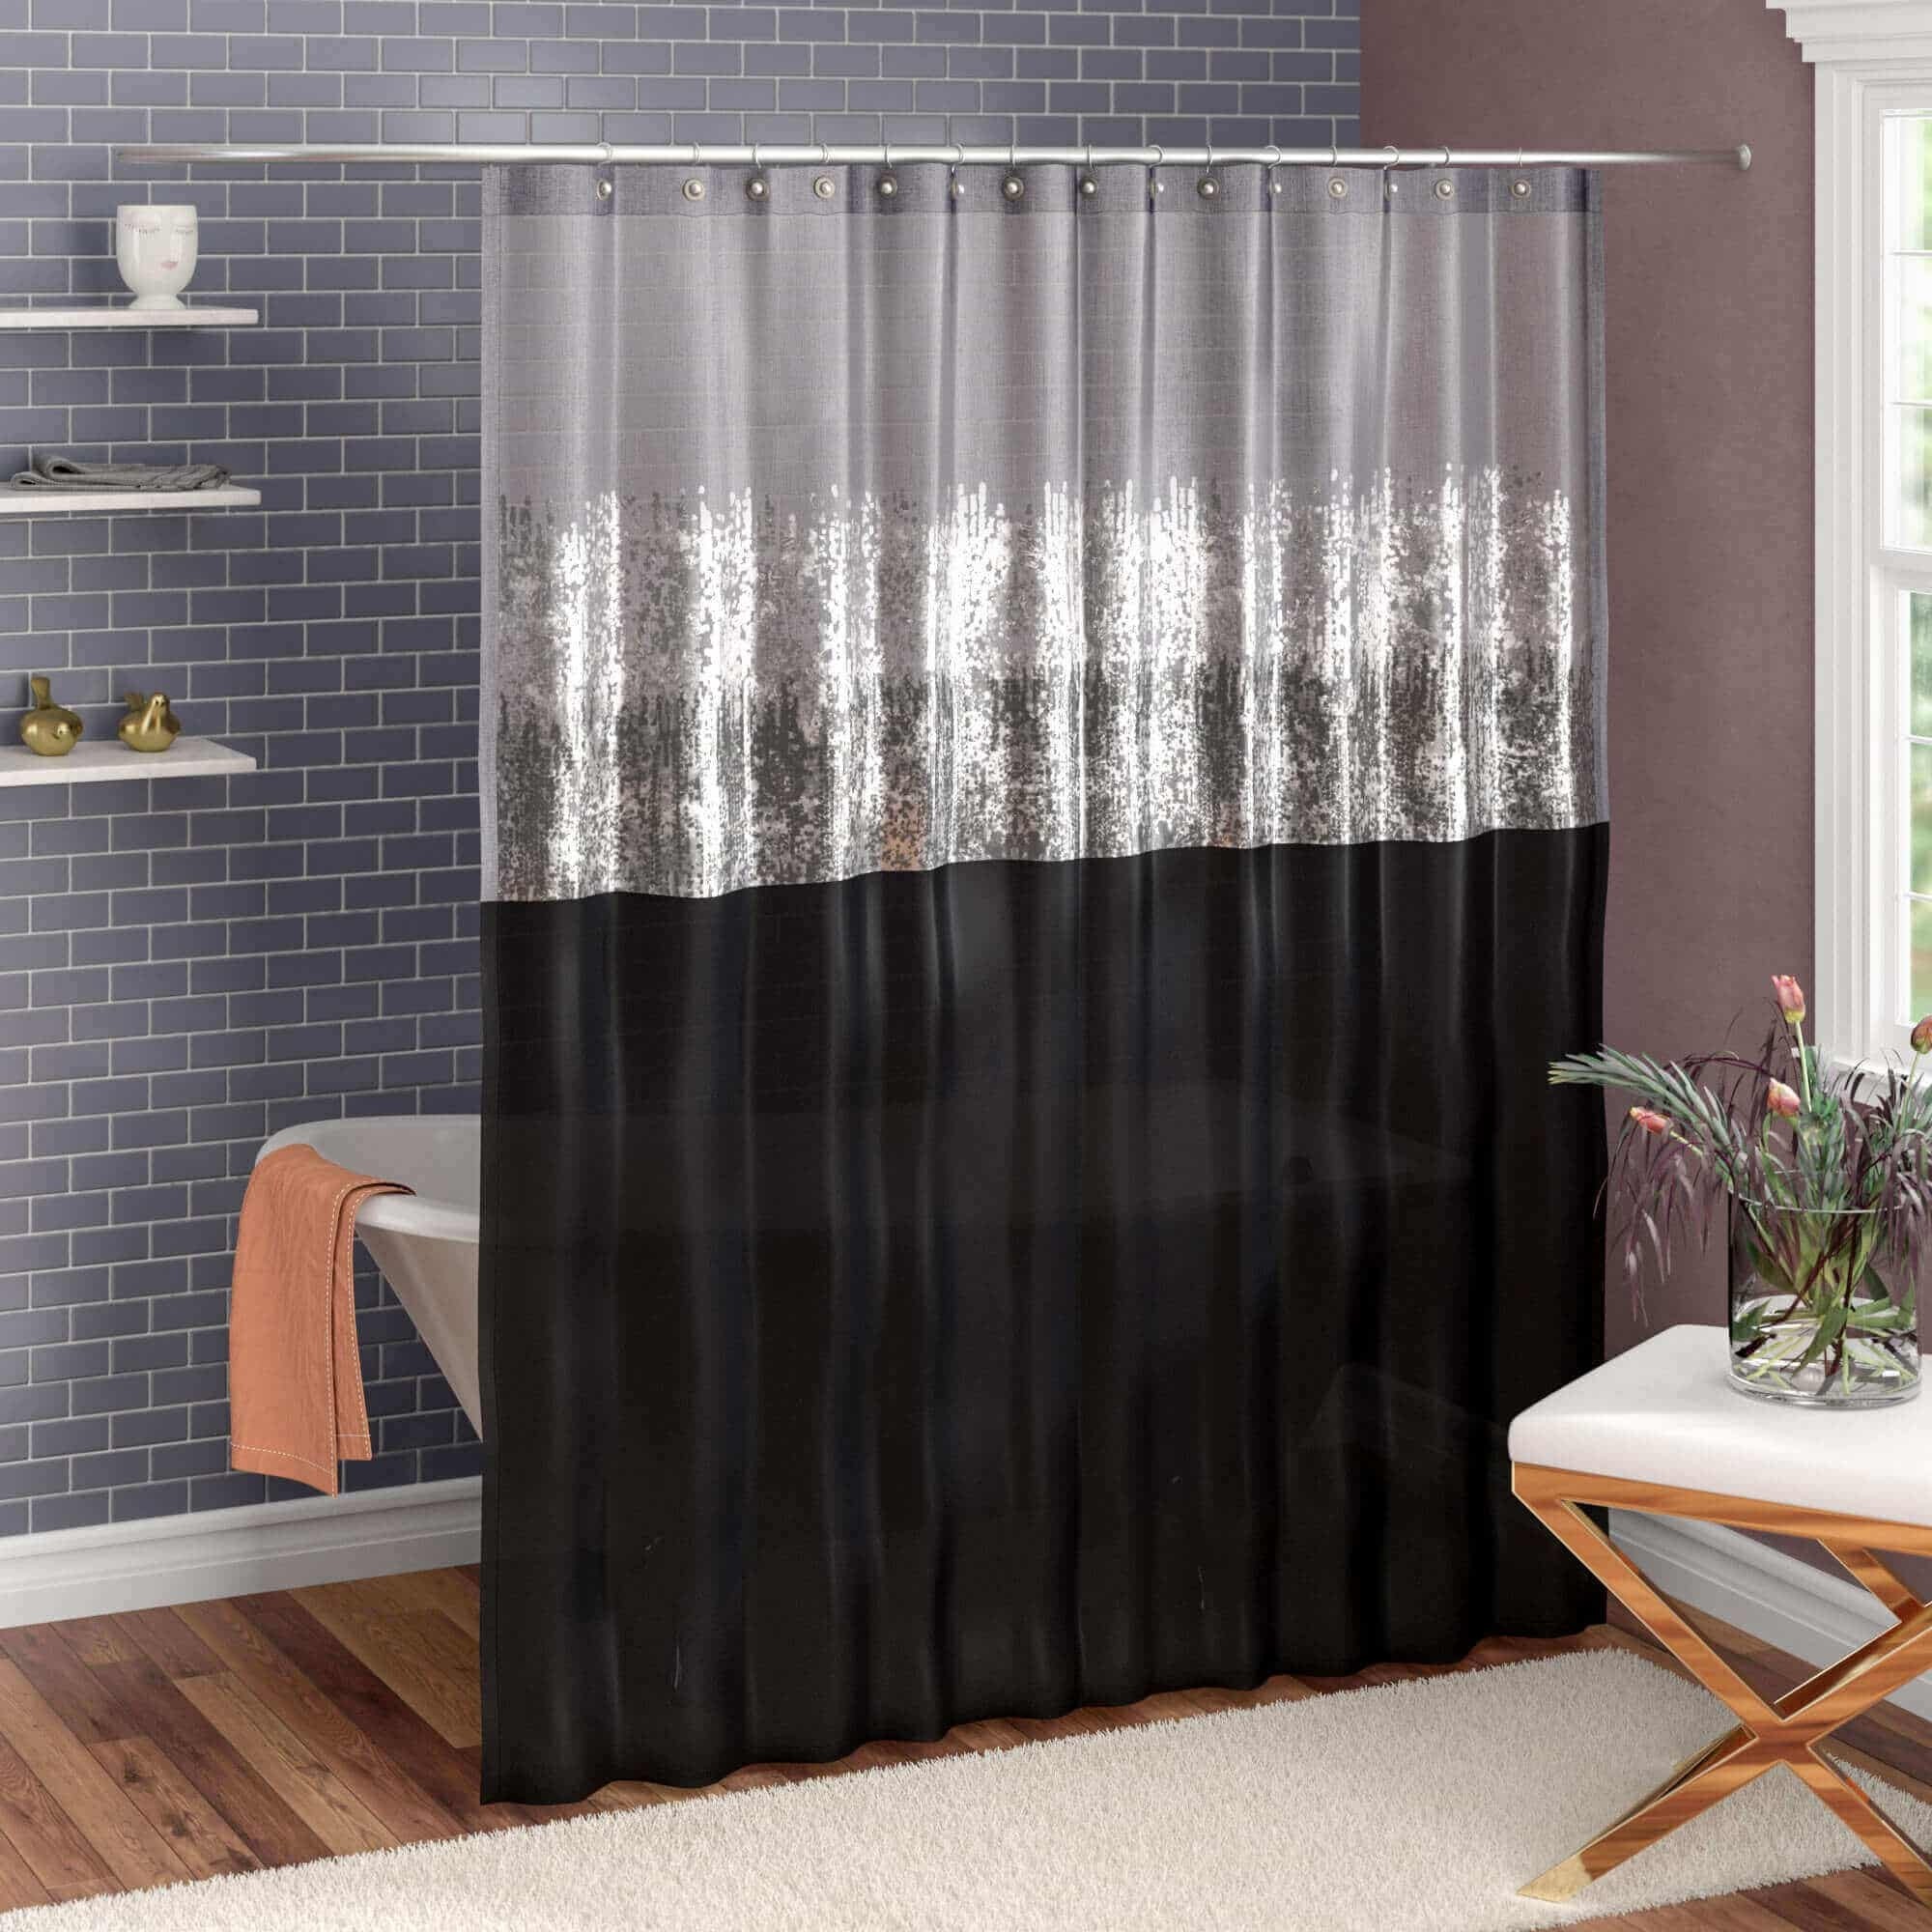 10 Best Shower Curtains for 2021 Ideas on Foter